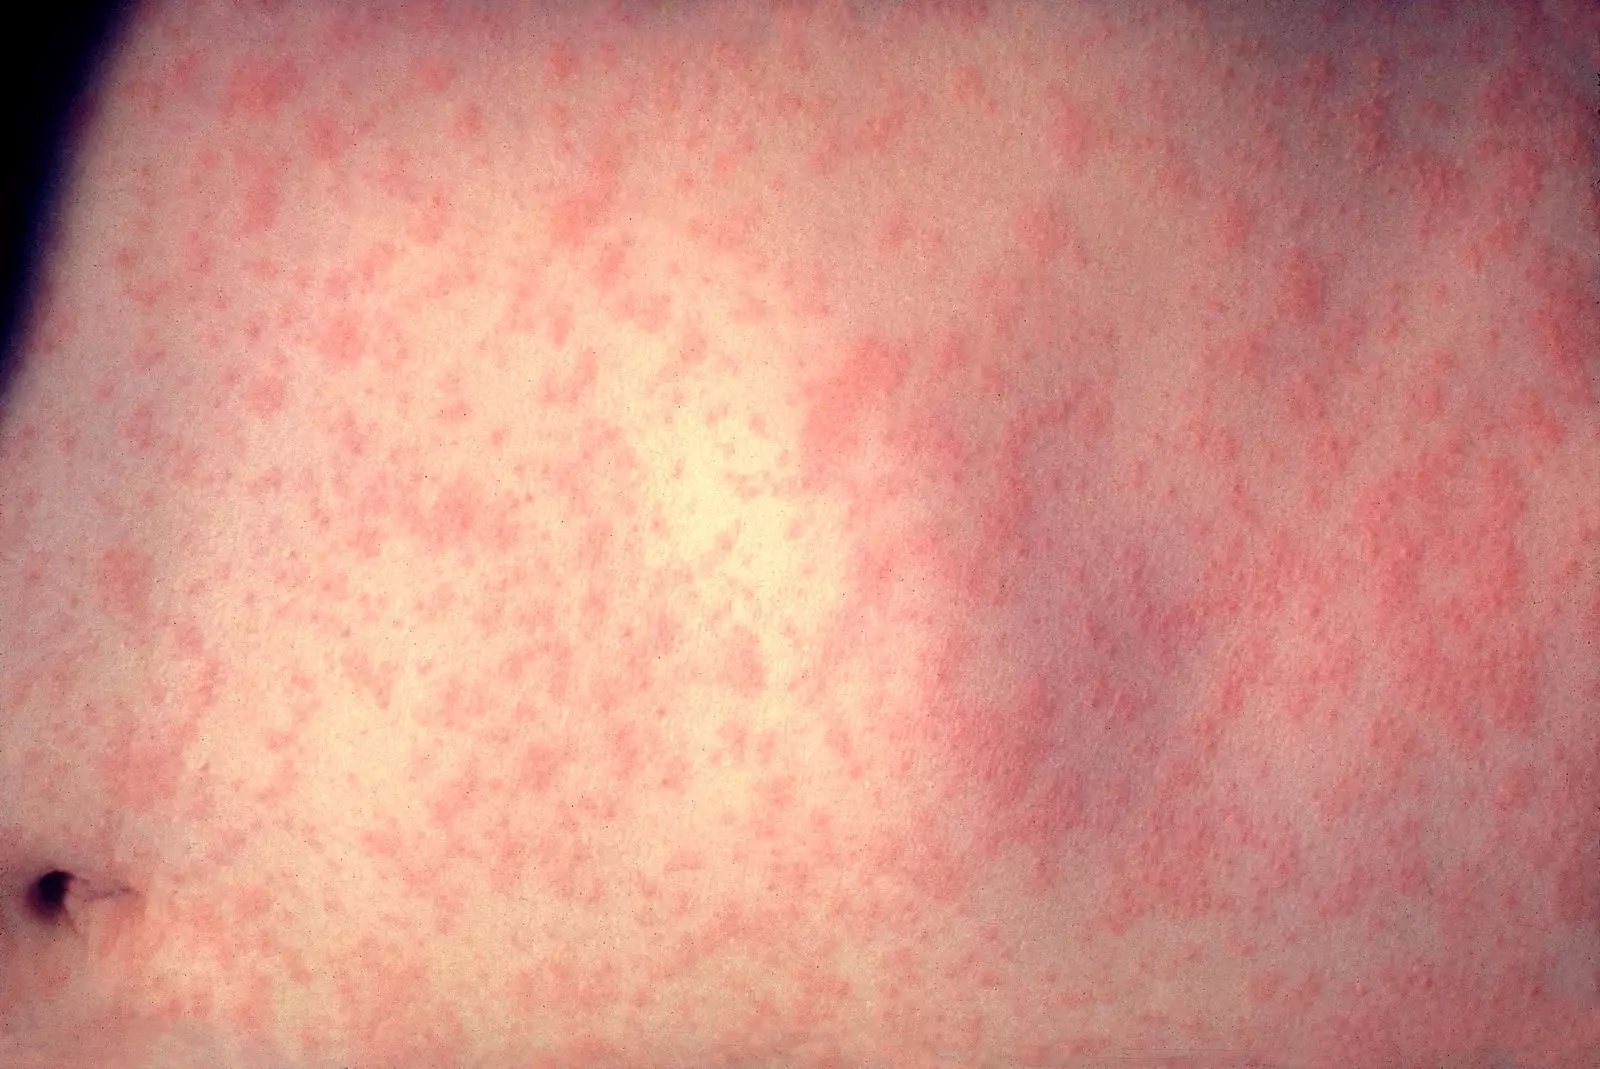 Measles can cause a red rash to break out after just a few days of infection.